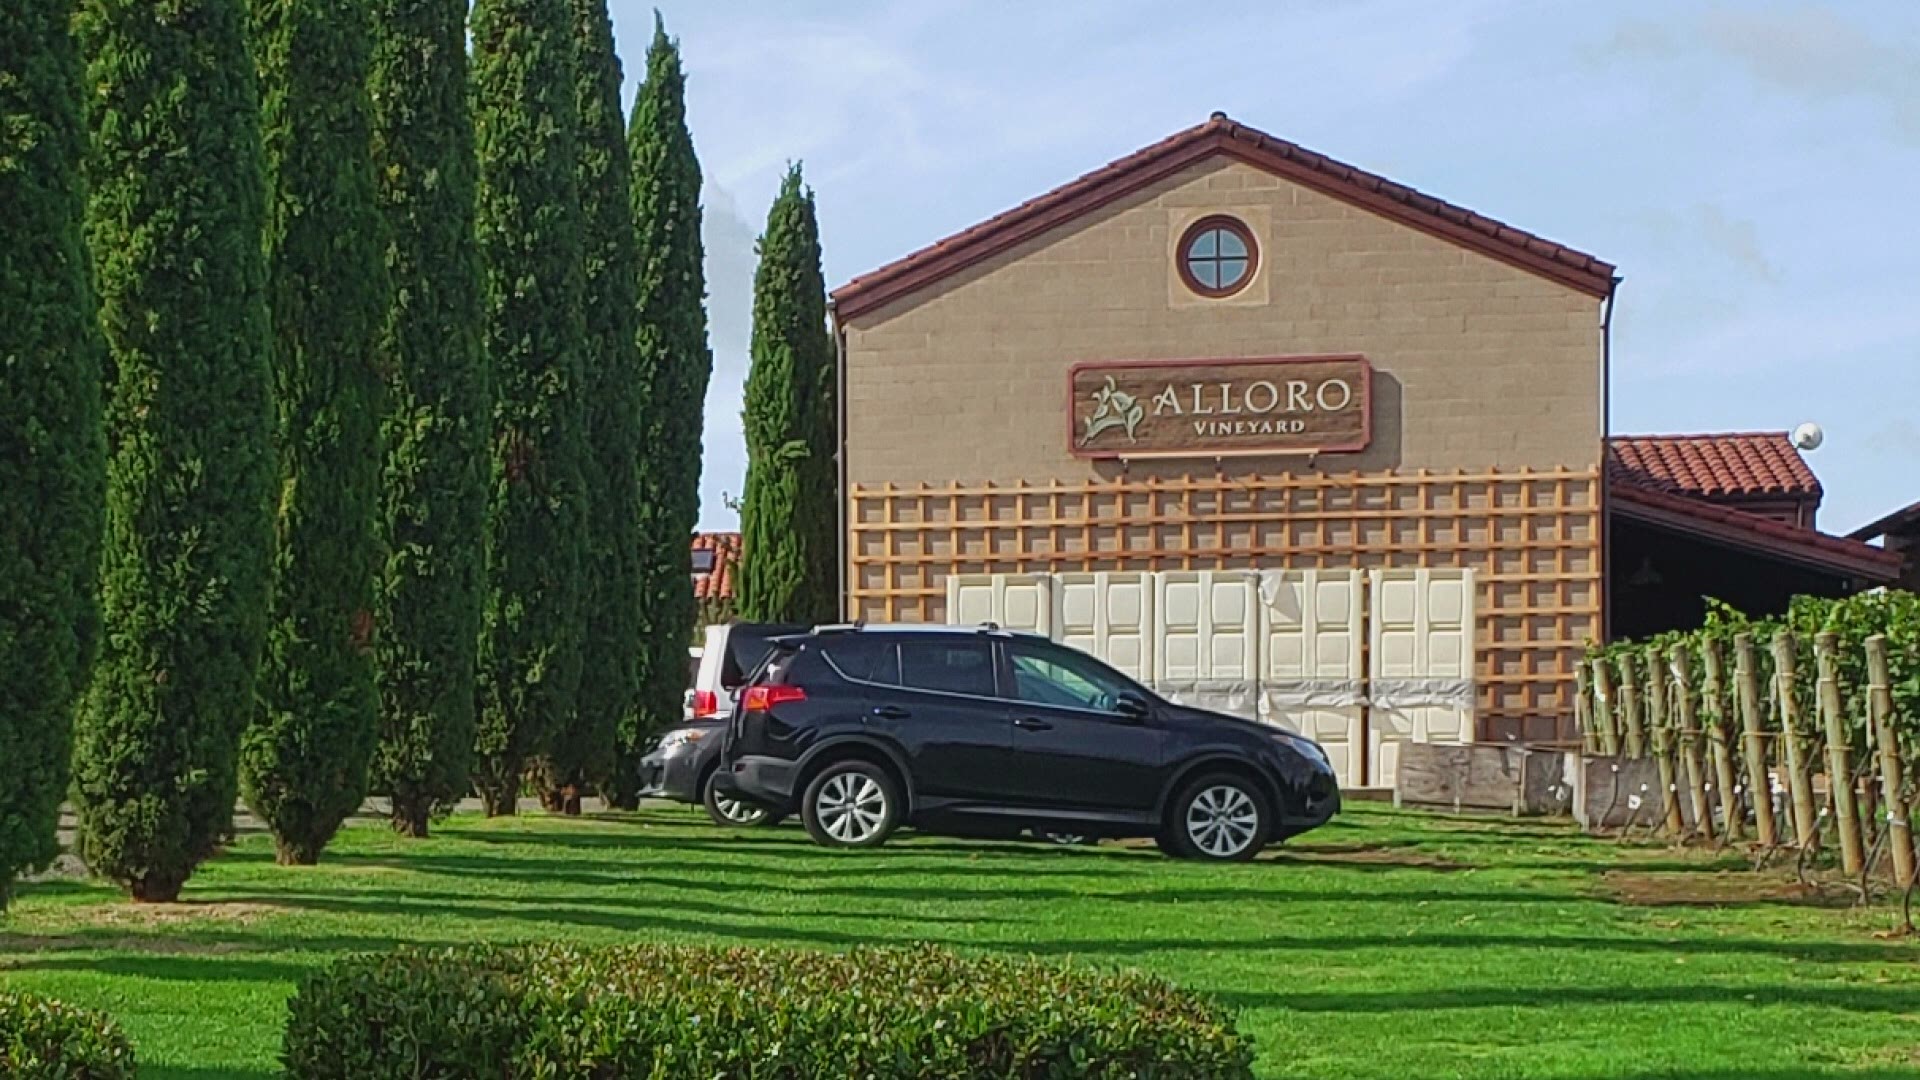 Fall is grape harvest season in the Willamette Valley so meteorologist Rod Hill took a trip out to Sherwood and visited Alloro Vineyard to see how it's done.